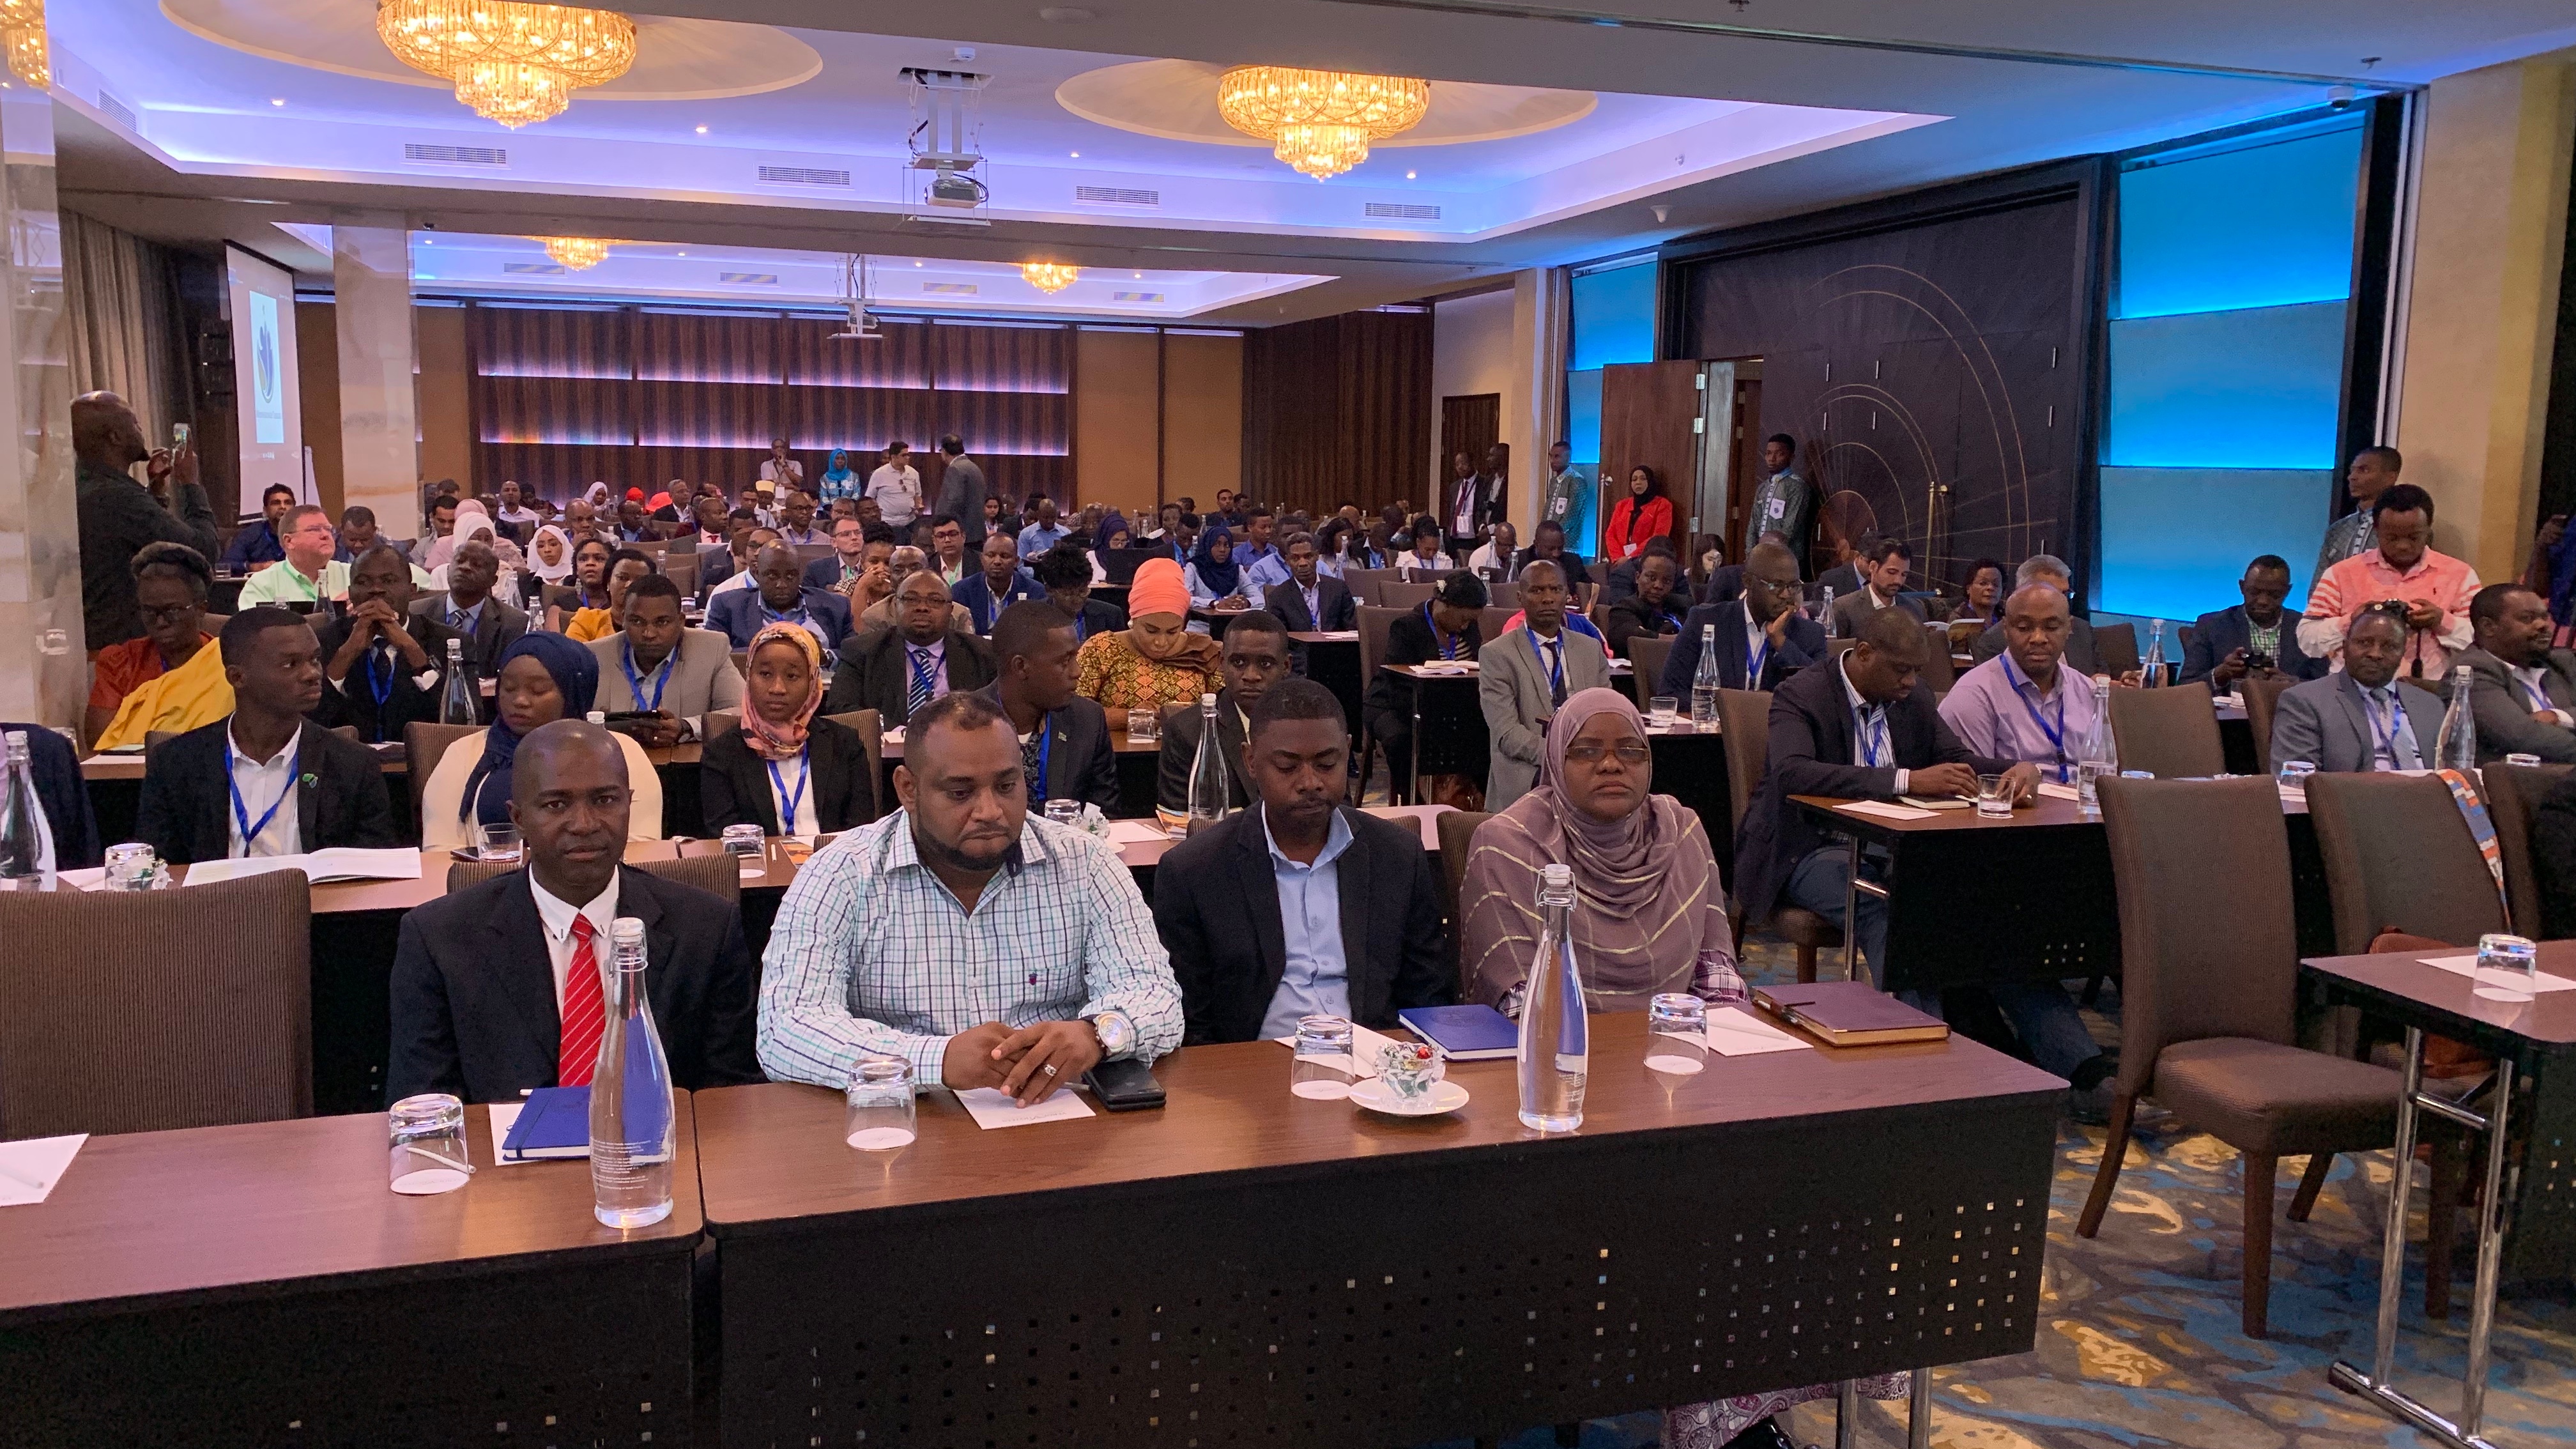 Around 175 experts from 18 countries participated in the 5th Eastern and Southern Africa Regional Microinsurance Conference